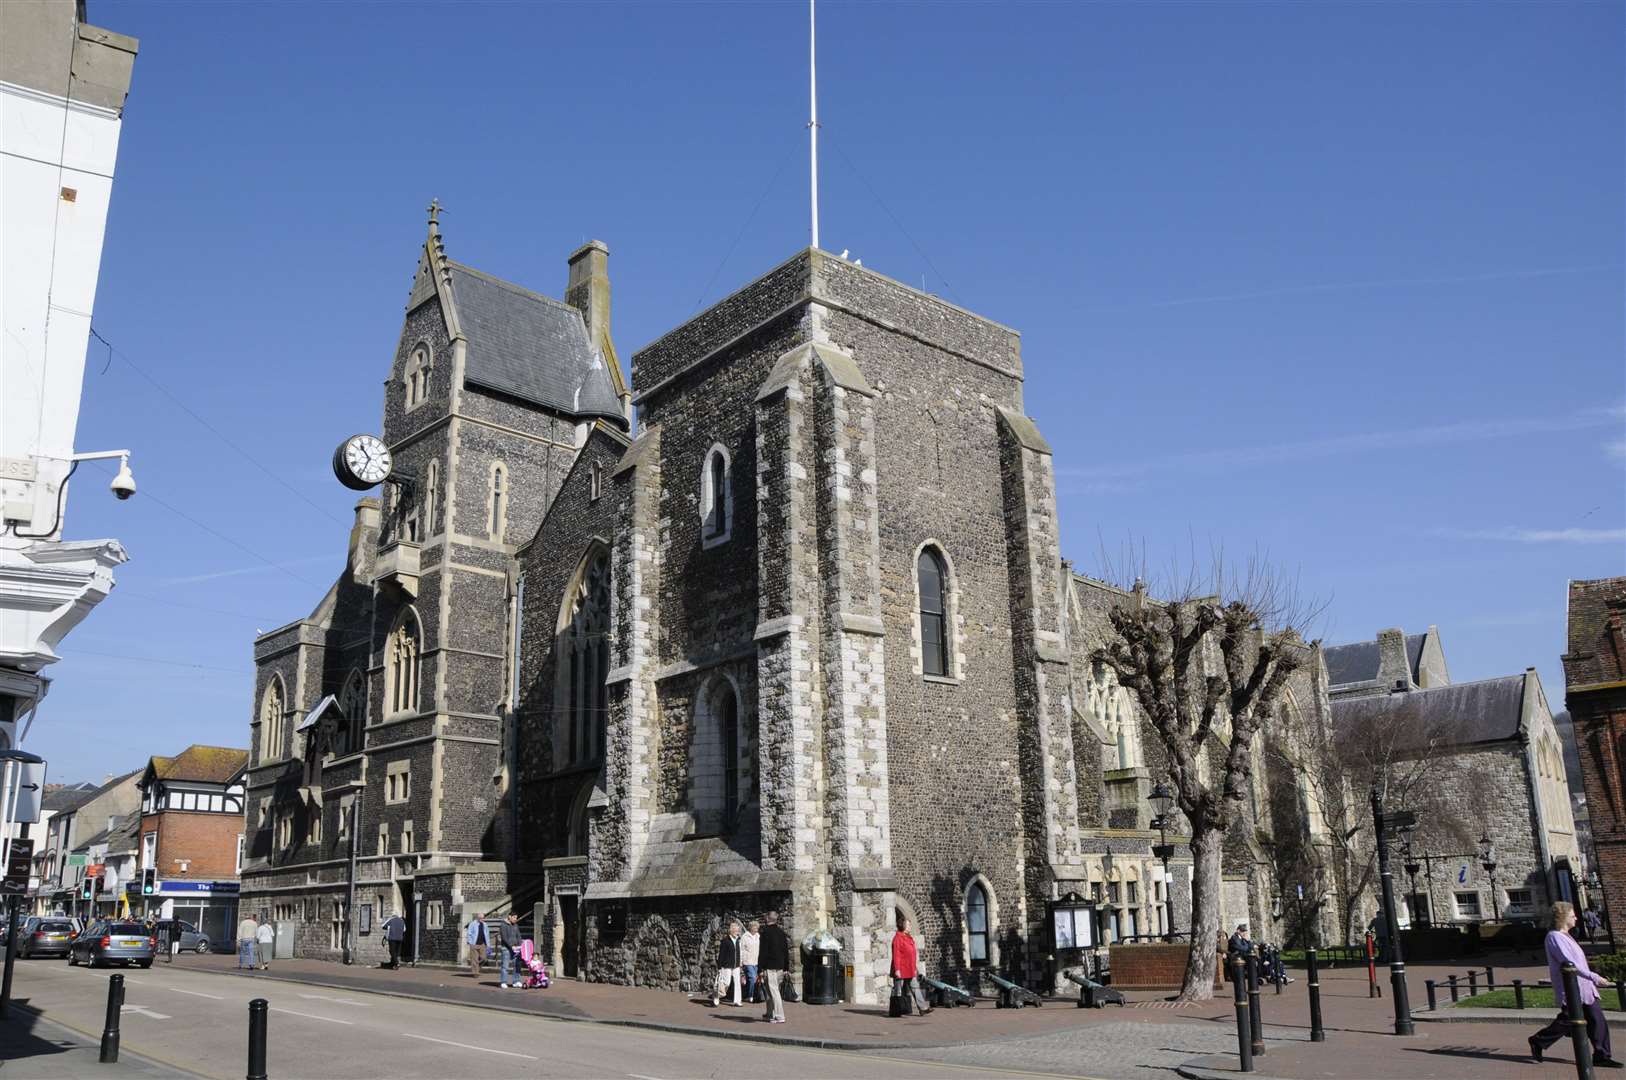 The Maison Dieu (Town Hall), one of Dover's heritage assets